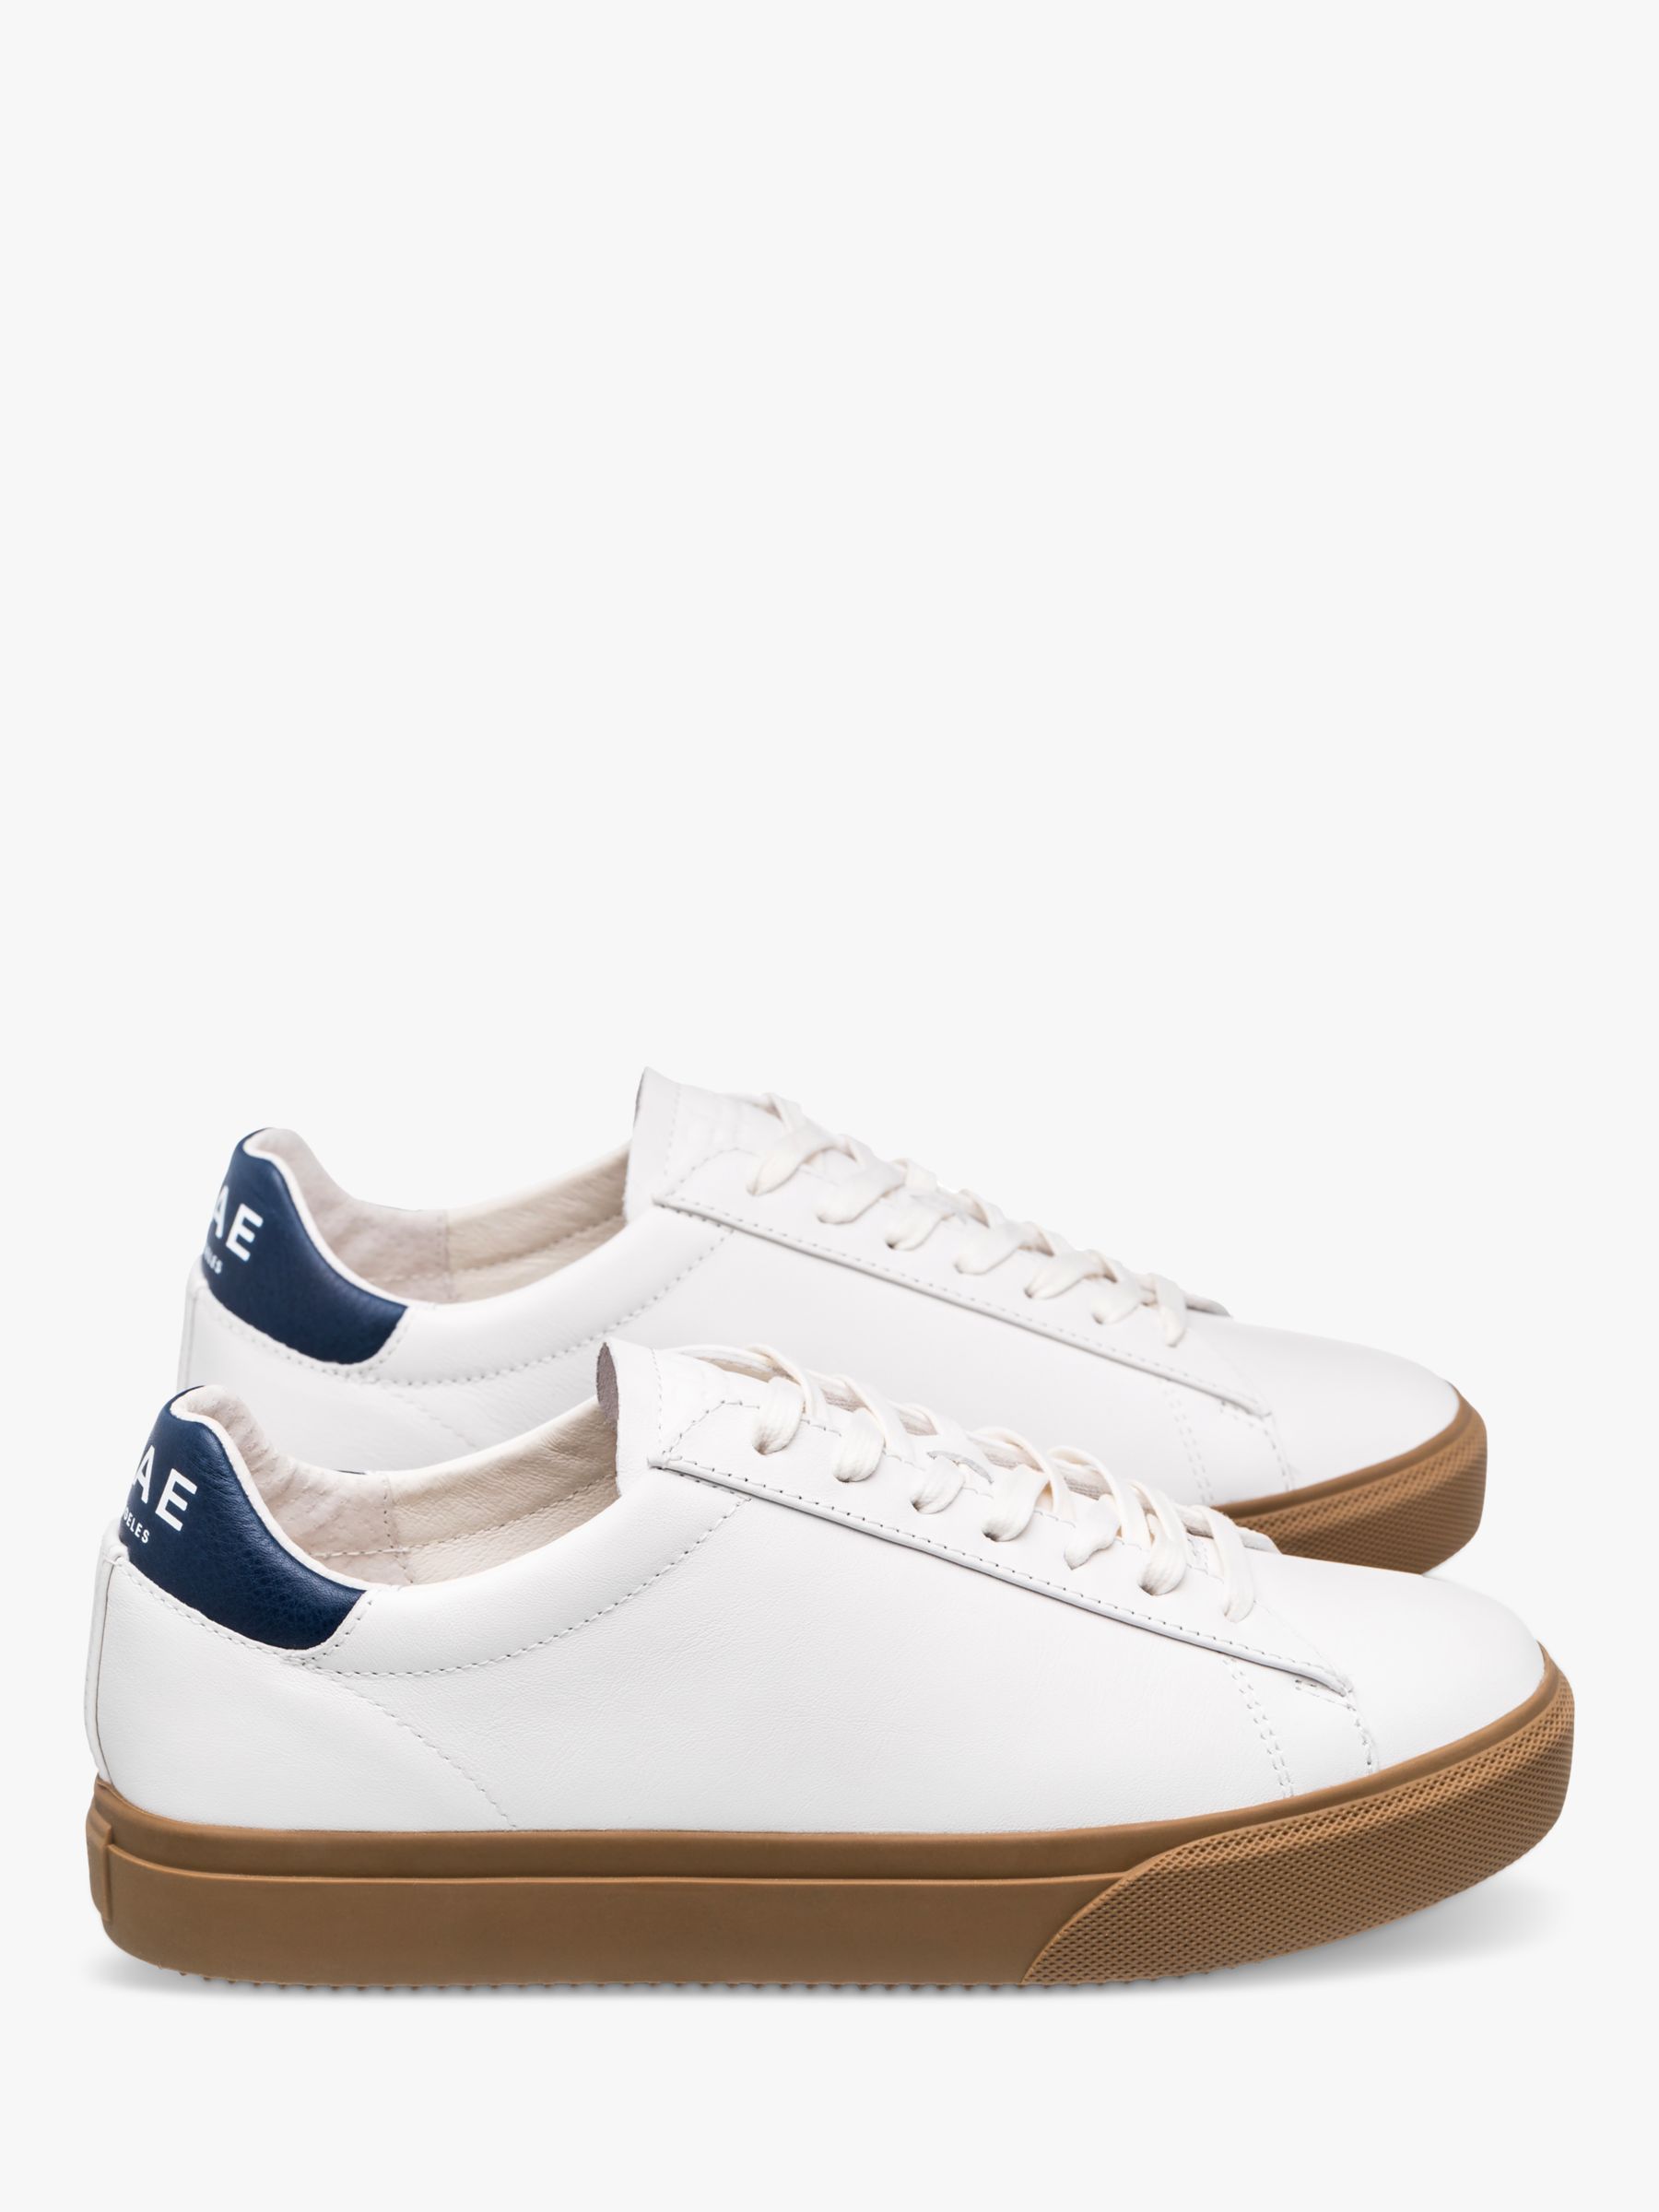 CLAE Bradley Venice Leather Lace Up Trainers at John Lewis & Partners